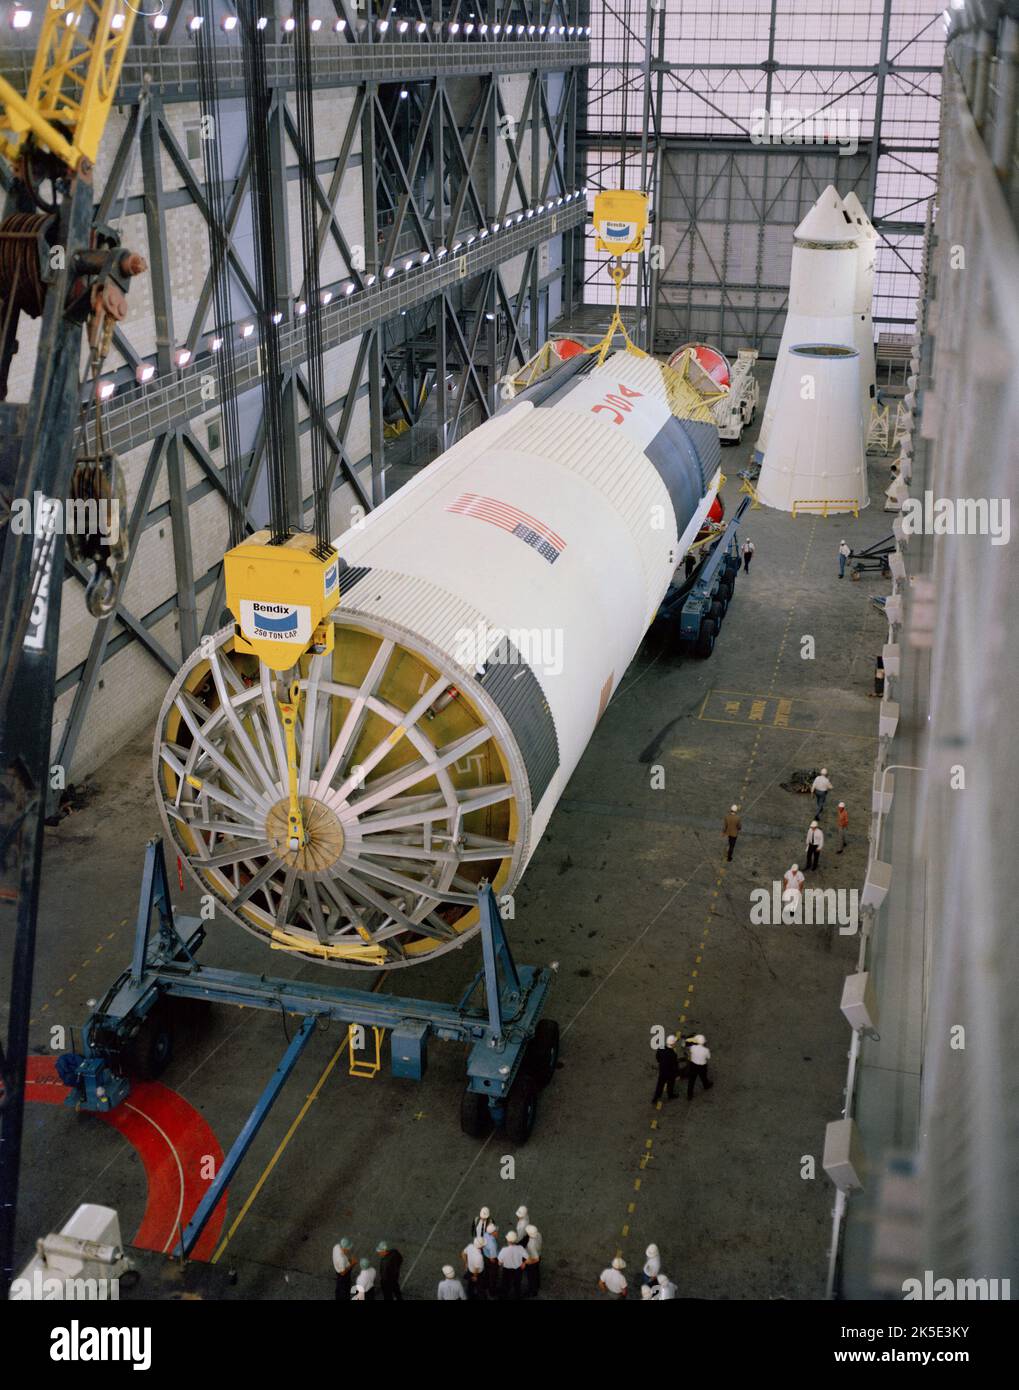 Apollo 10. Here, Saturn V first stage is prepared for final assembly in the high bay area of the Vehicle Assembly Building at NASA's Kennedy Space Center. NASA's Marshall Space Flight Center designed, developed and managed the production of the Saturn V rocket that took astronauts to the moon. NASA image / Credit: NASA Stock Photo